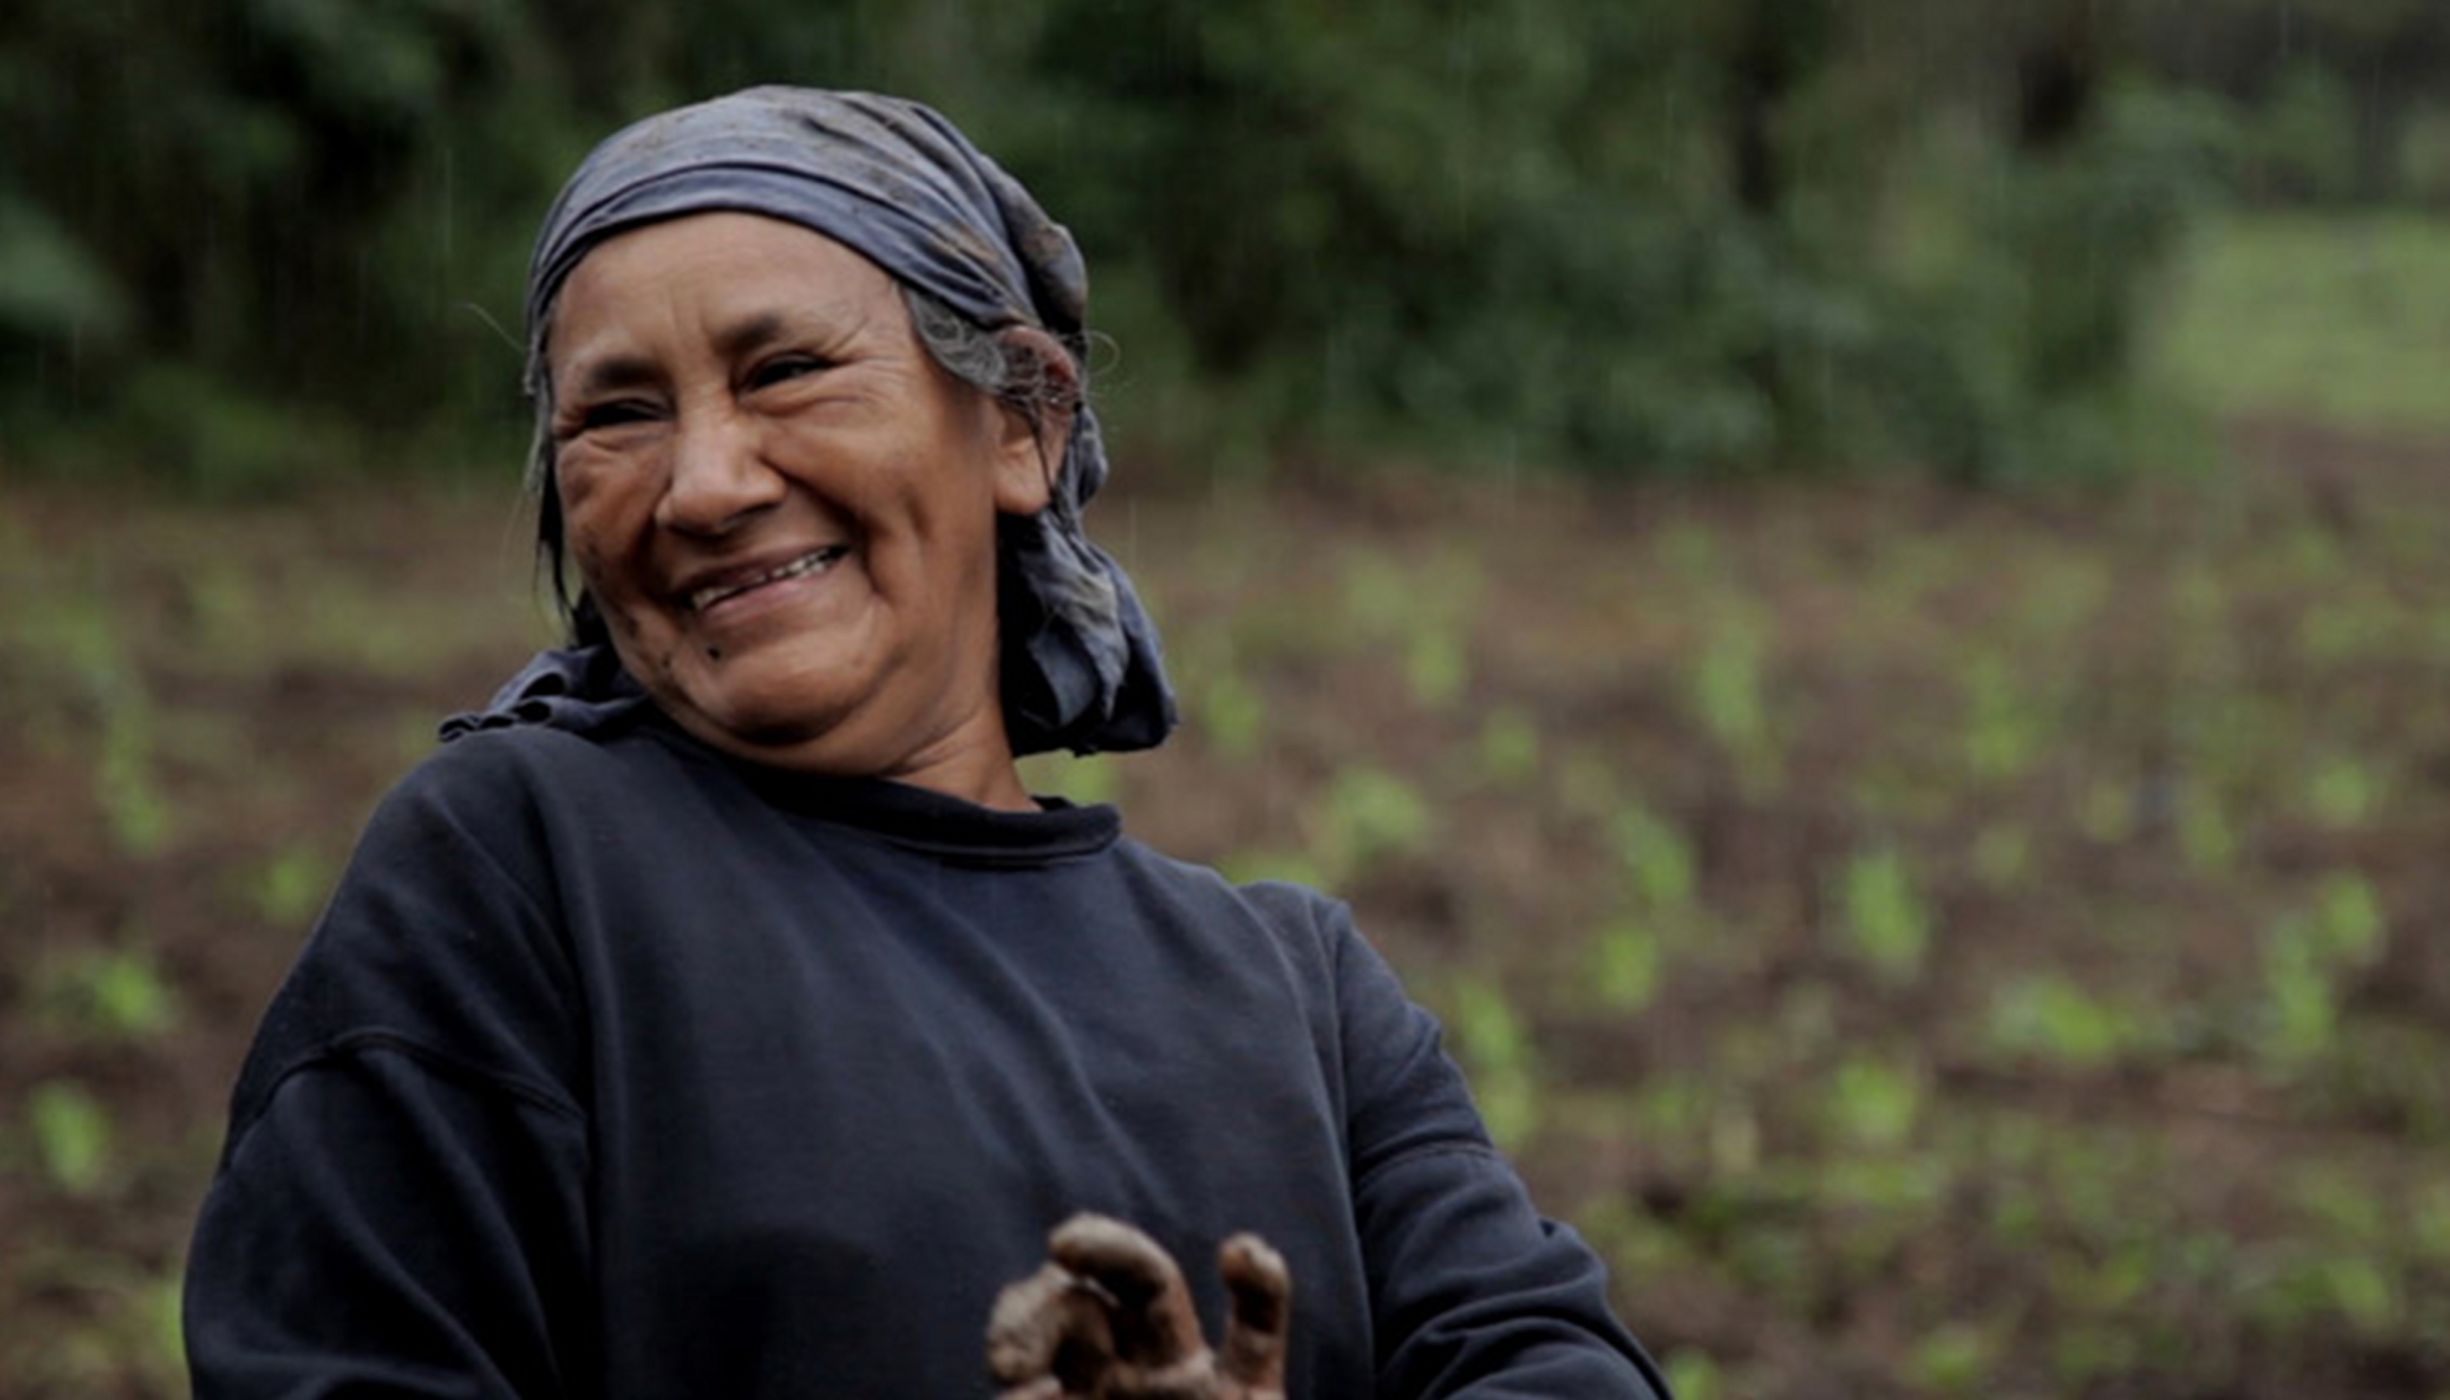 In communities like Alta Gracia in México, the incorporation of women is an opportunity to move forward on sustainable development and forestry conservation.